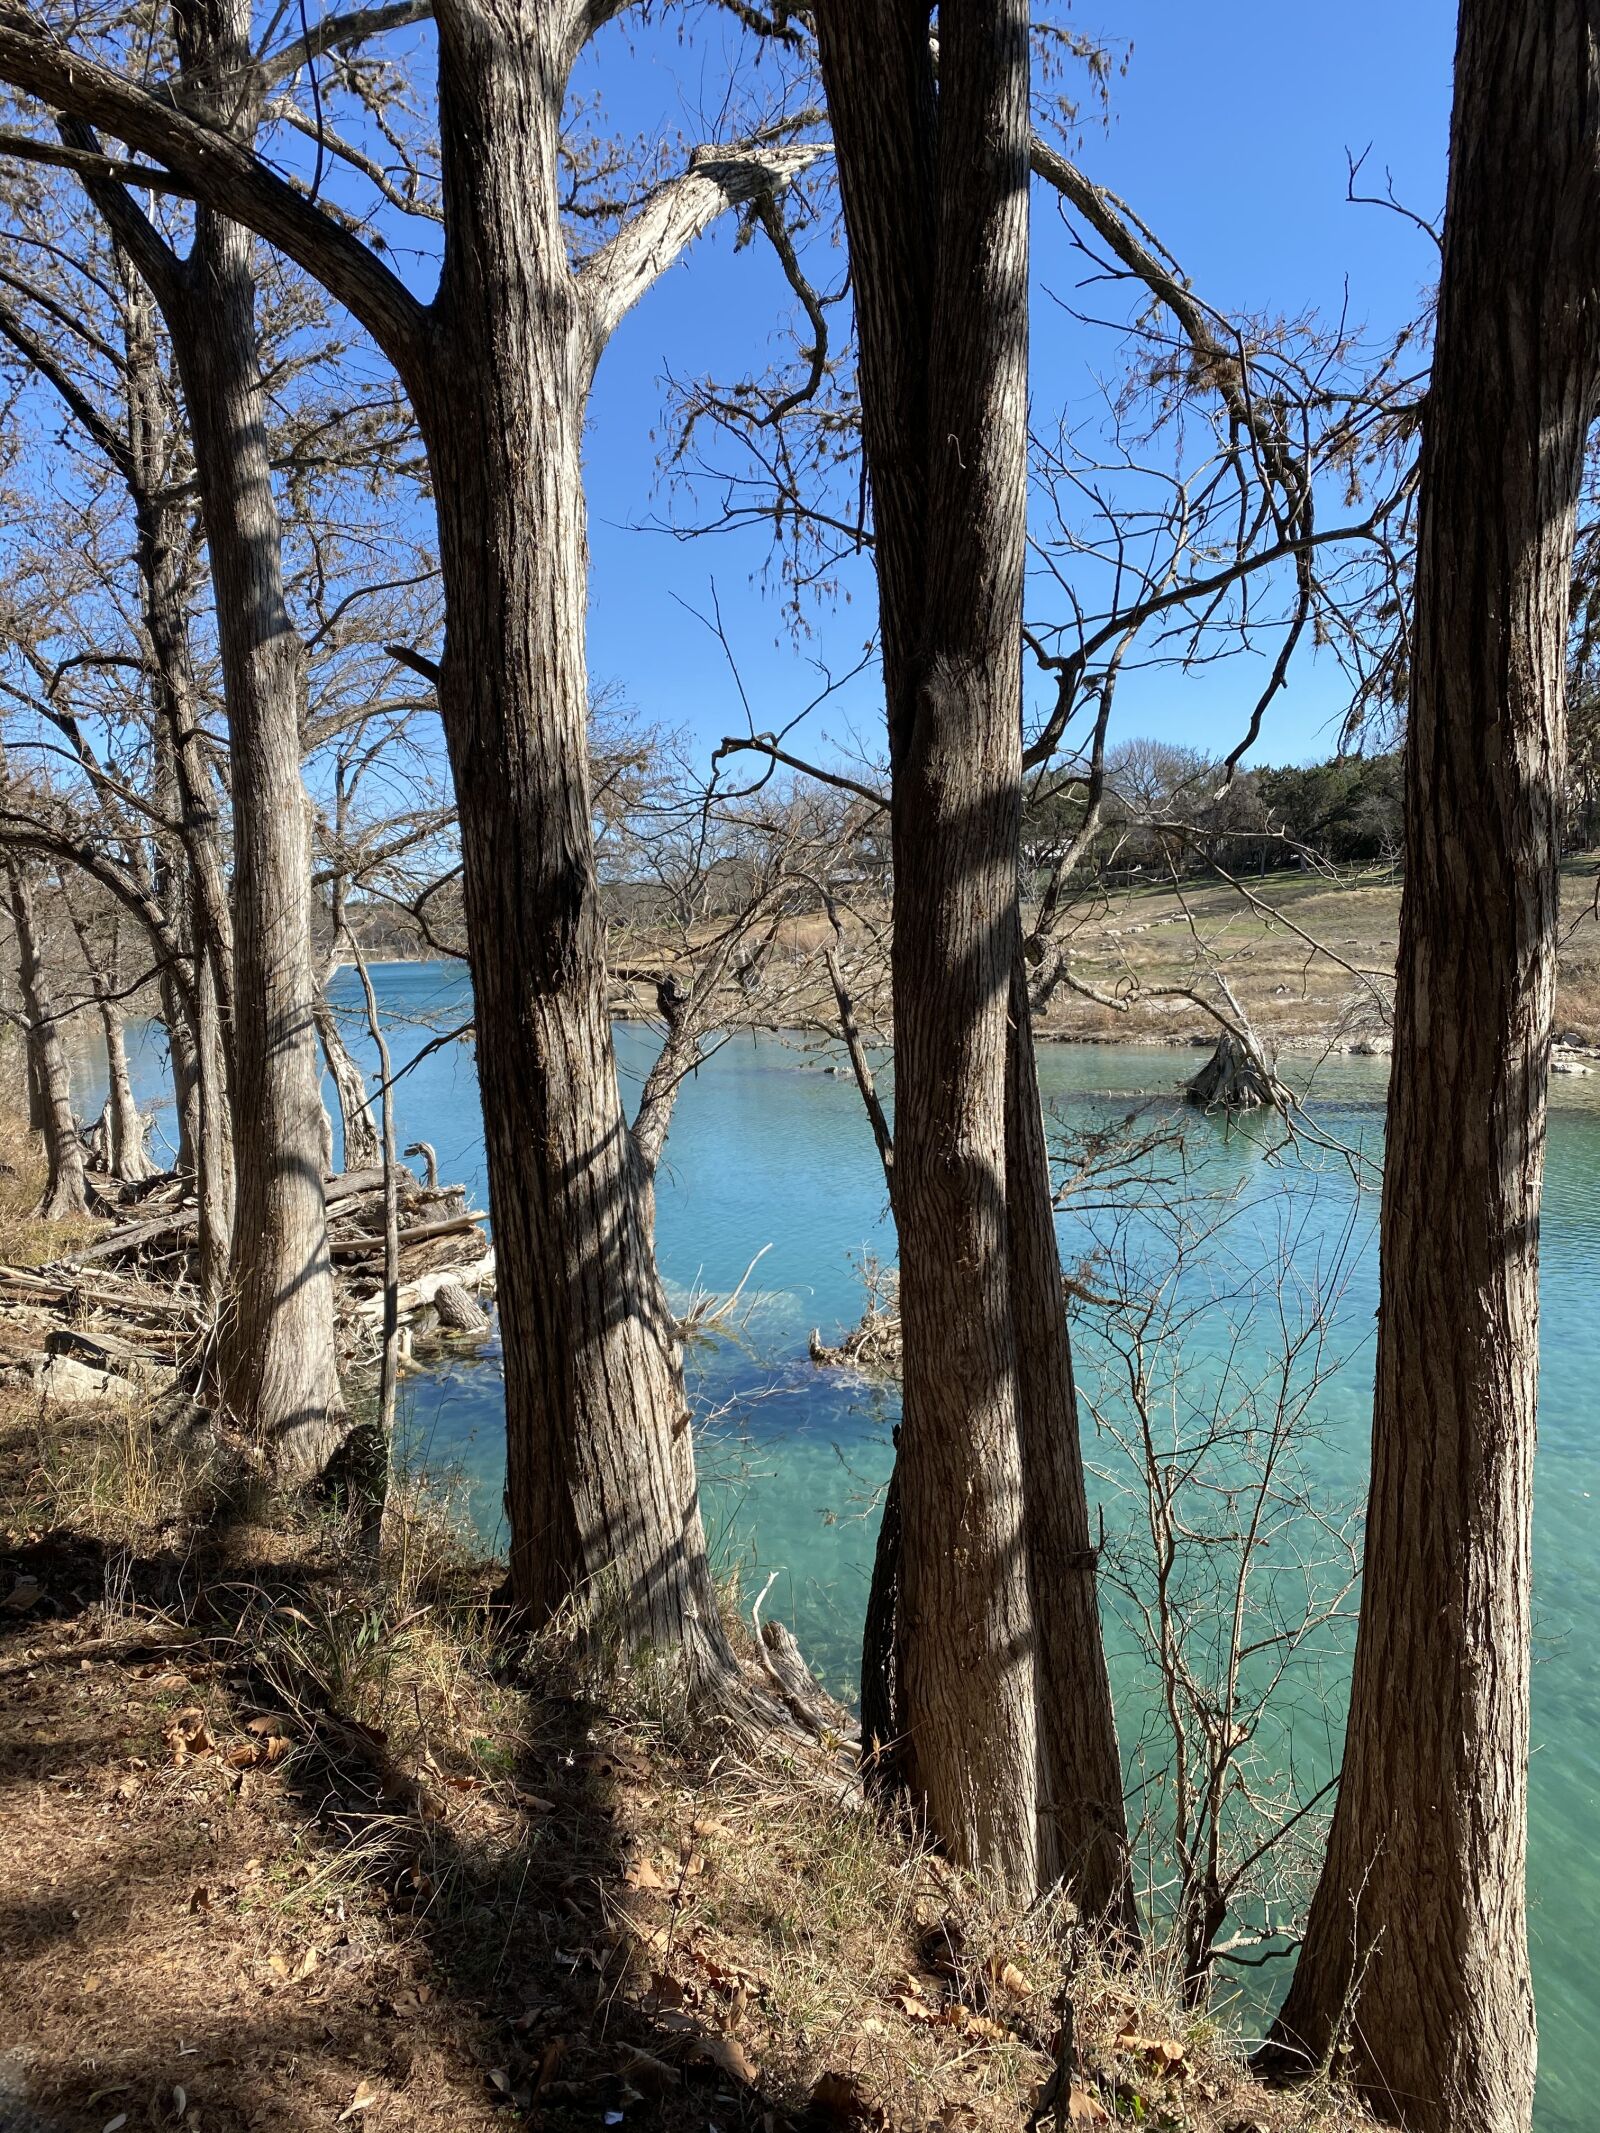 iPhone 11 Pro Max back triple camera 4.25mm f/1.8 sample photo. Blanco river, texas, river photography